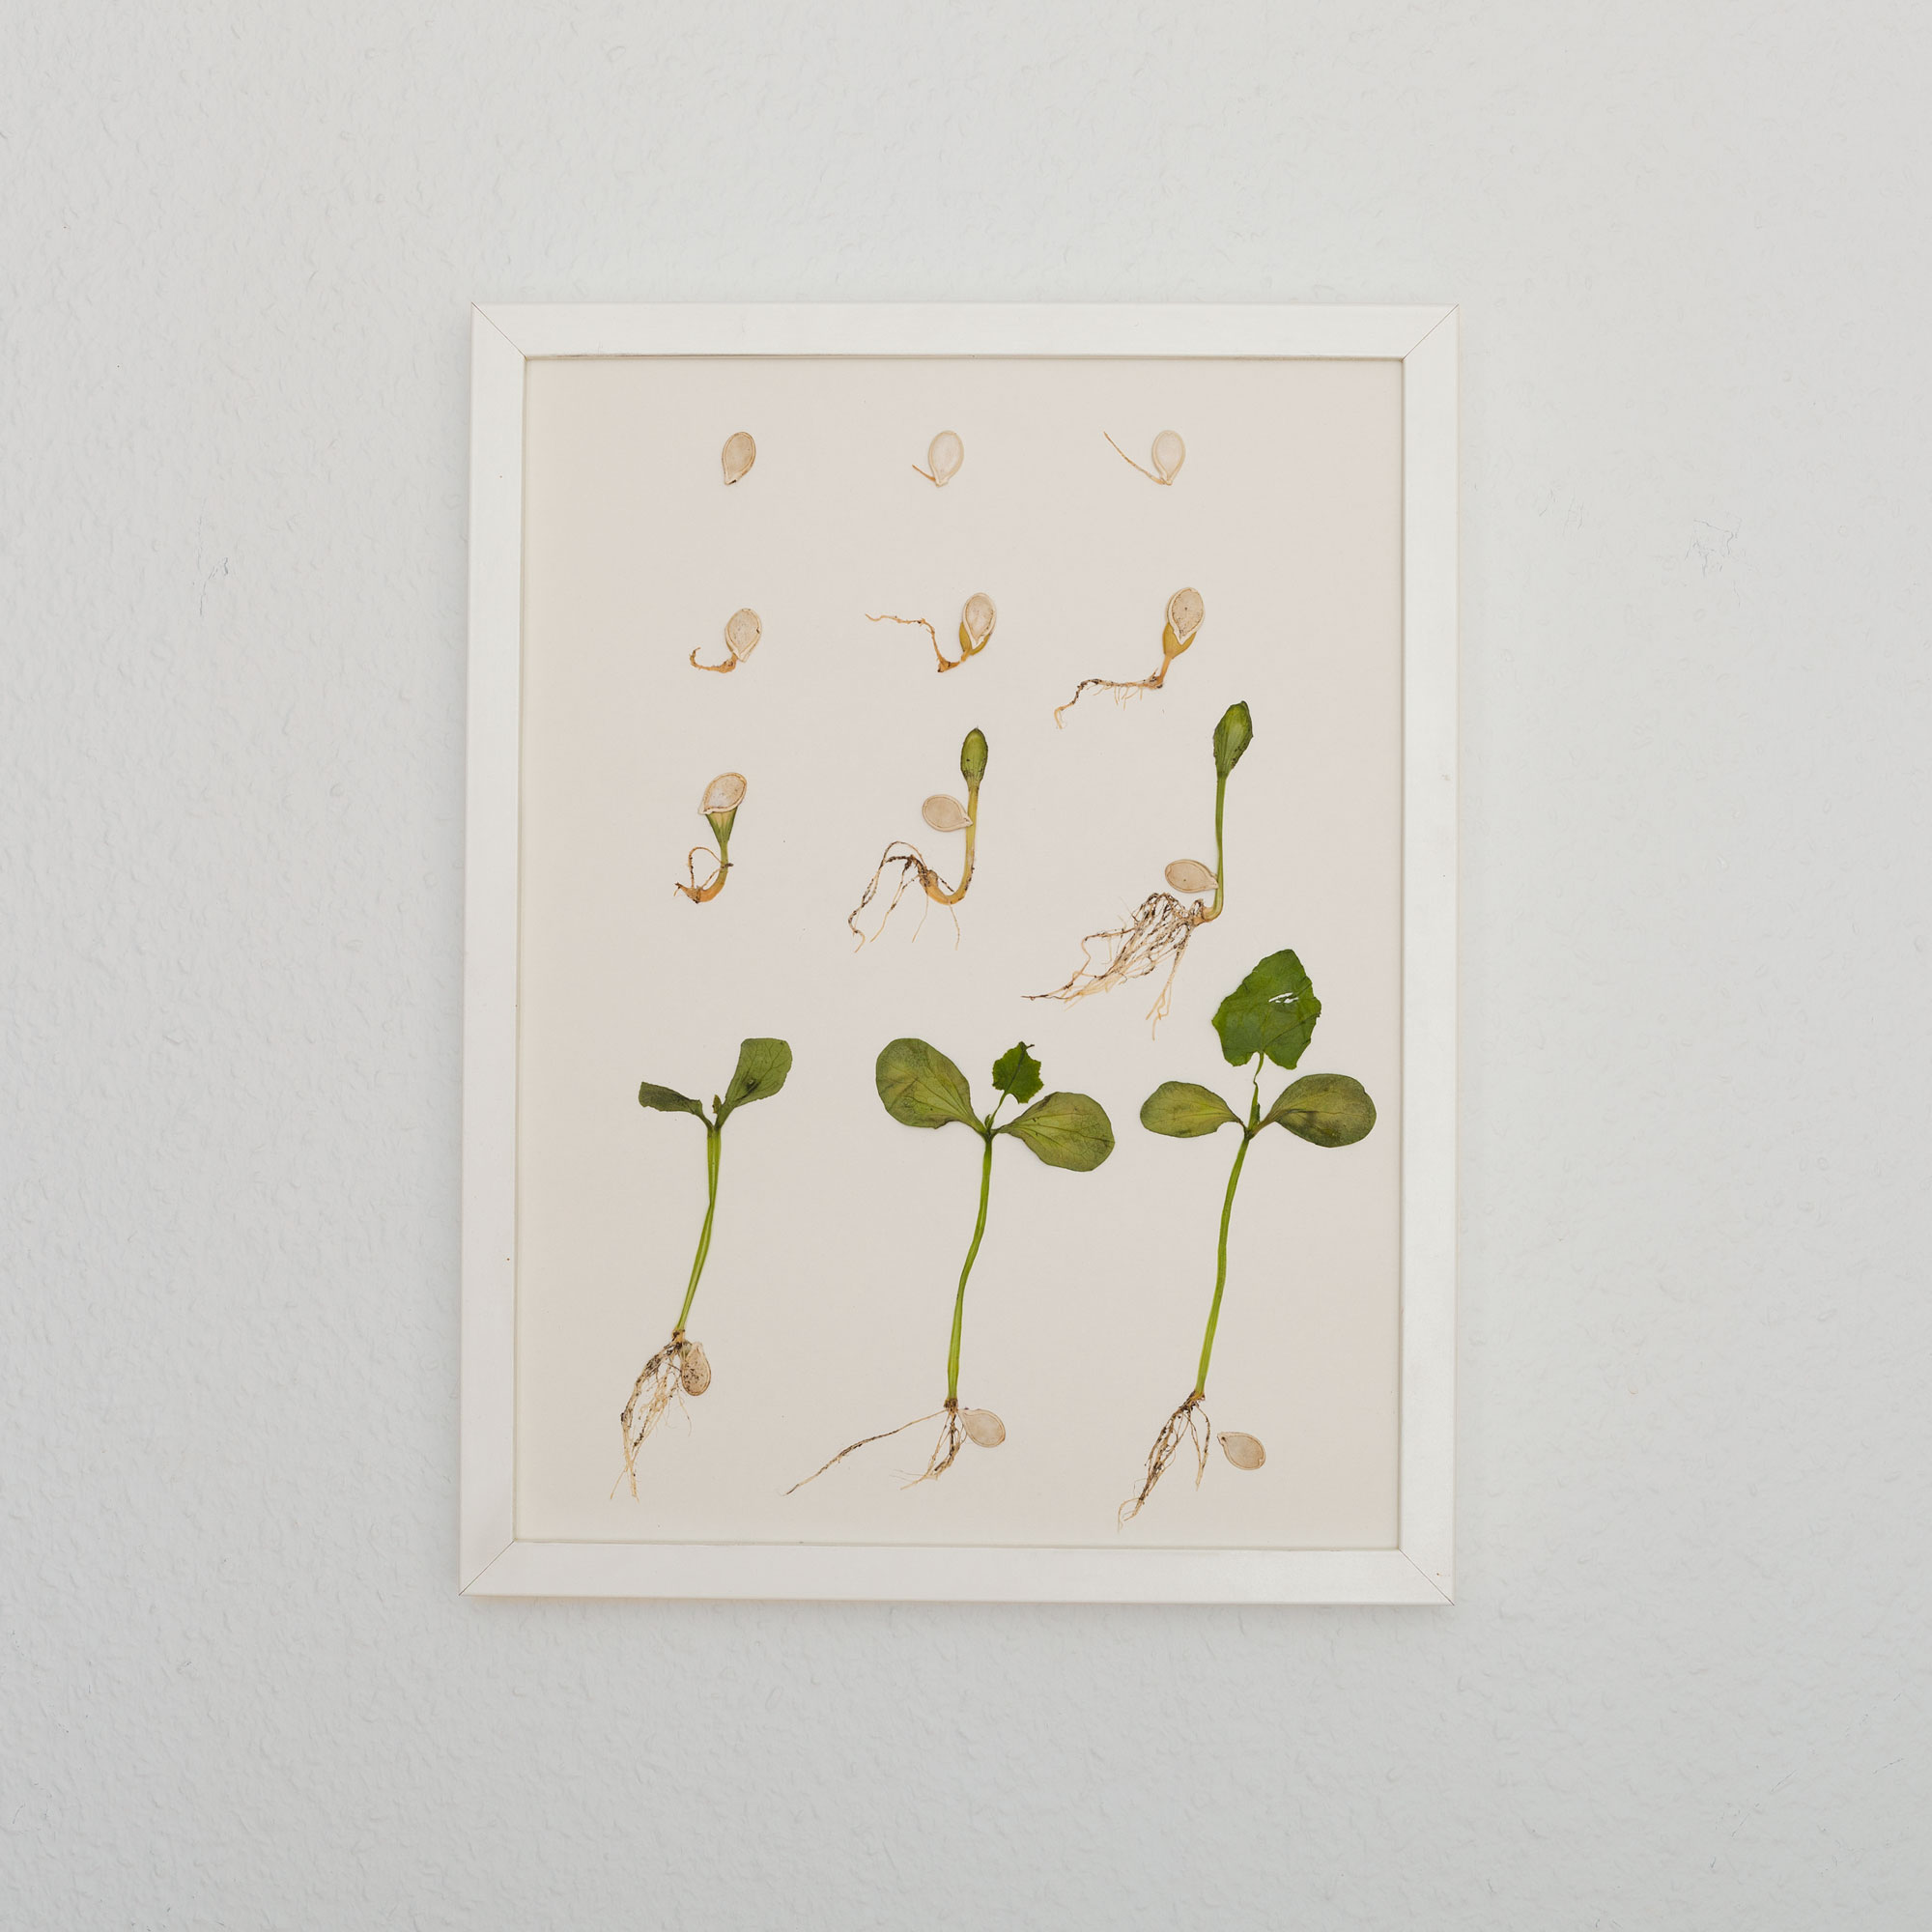 Baby steps, 2019. Sprouted and dried pumpkin seeds on paper.